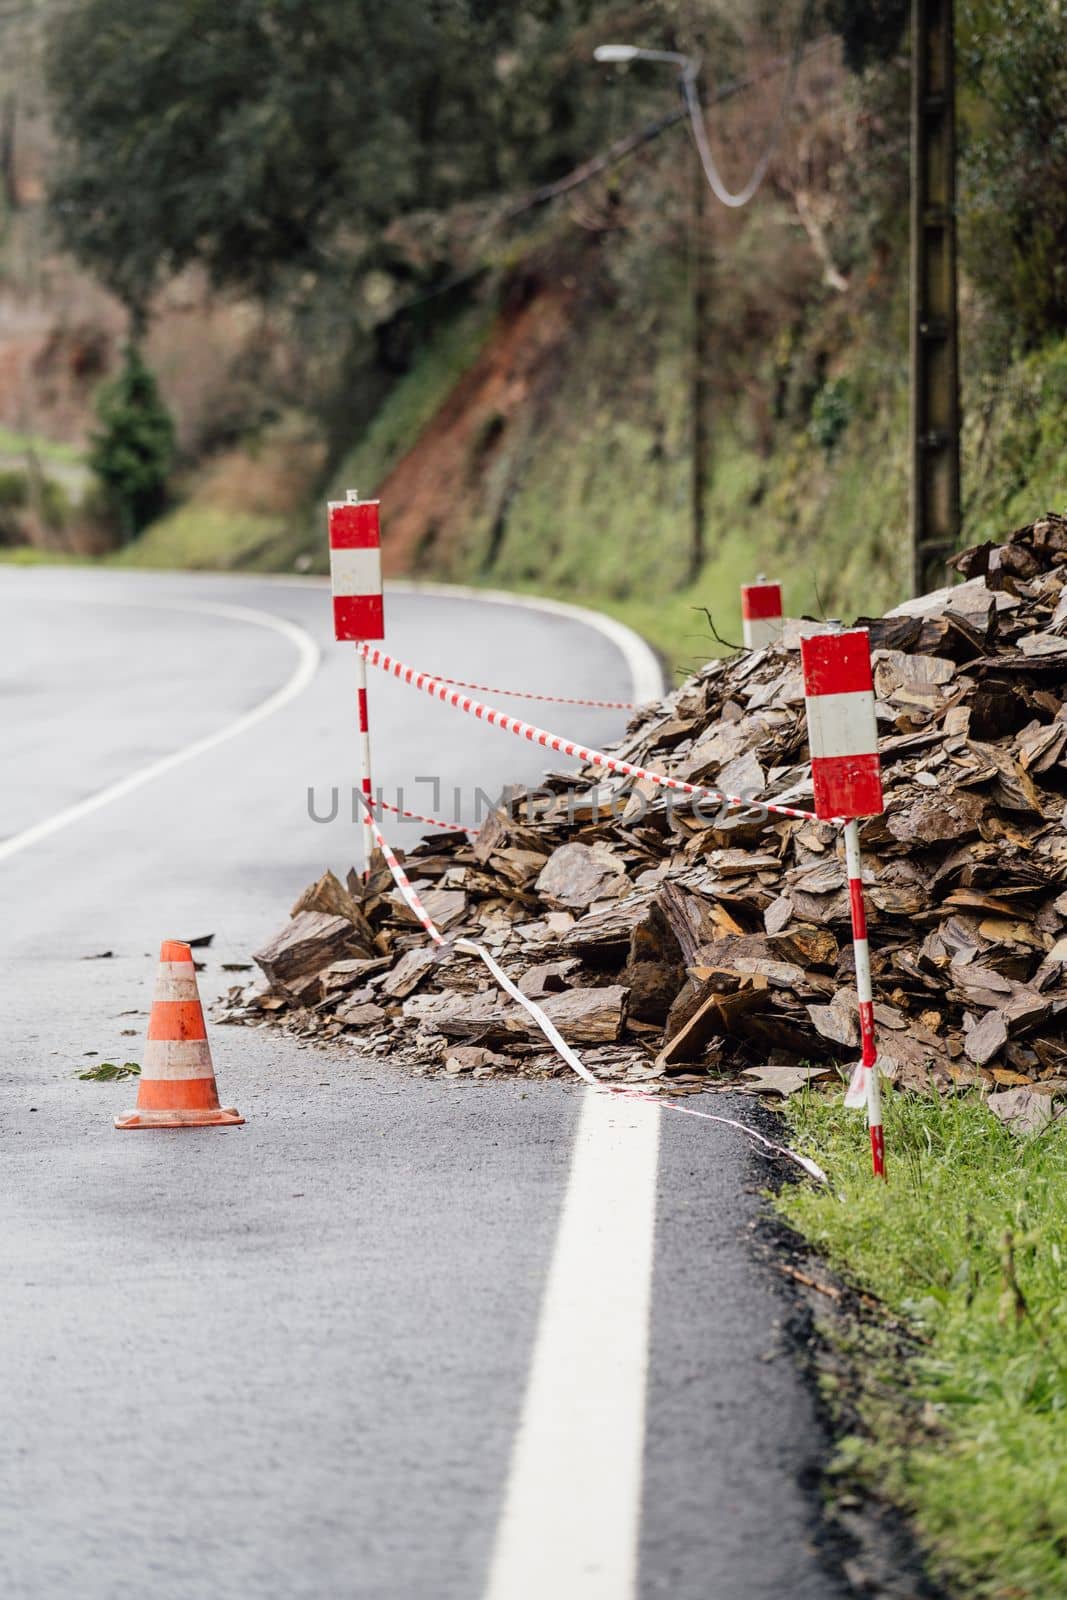 Rocks blocking the road due to a rockslide after a heavy rainfall. by papatonic